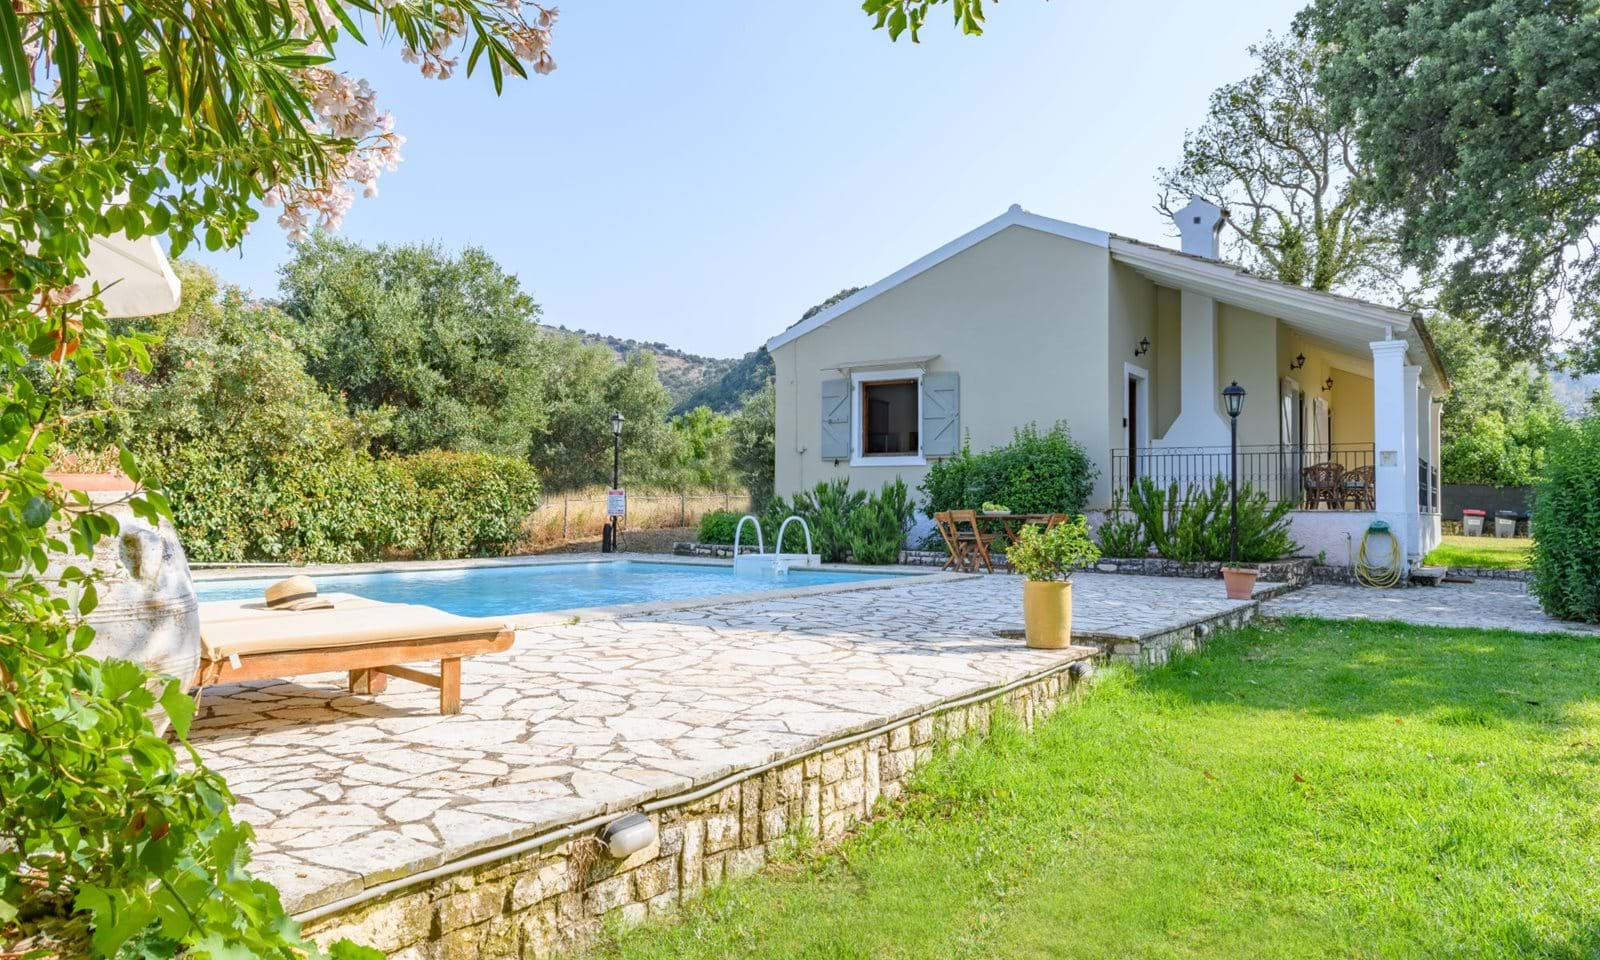 This beautifully designed villa is in the quiet hills of Loutses village, located between Old Peritheia and a short drive to the beaches of Kalamaki and St. Spyridon. The house enjoys lovely views looking over to the sea and mountains of the mainland to have privacy and extra space outside. The main entrance is through the kitchen and dining room with a window glazing over to the pool. The house is ideal for families, giving you the freedom of privacy and short drive to Acharavi for all amenities. It could be used for a summer rental or for your own personal use.